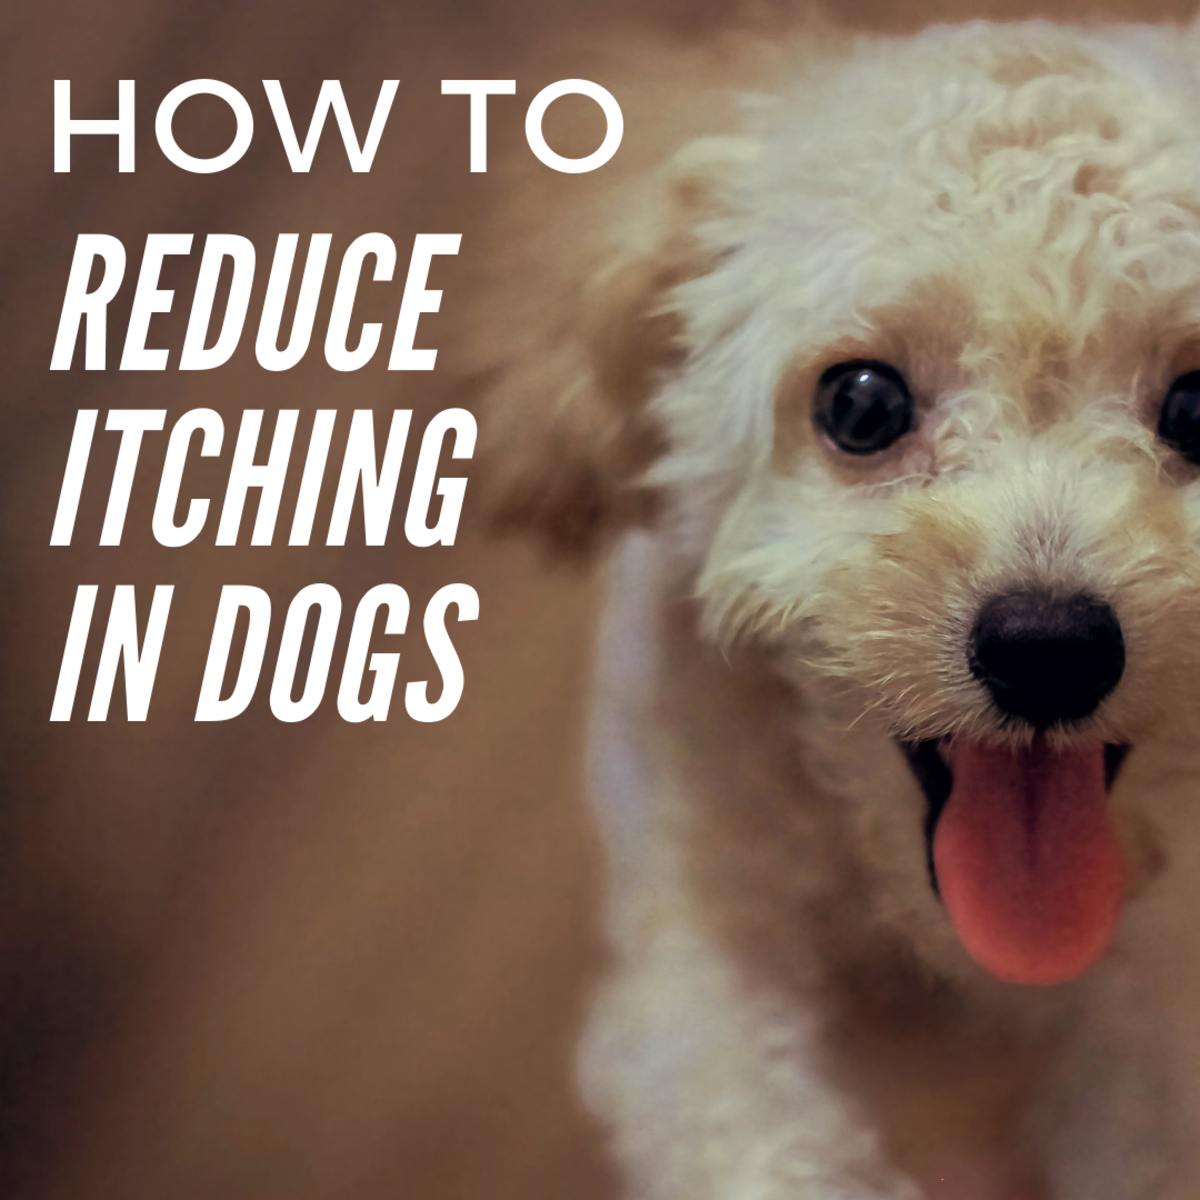 Reduce Itching in Dogs